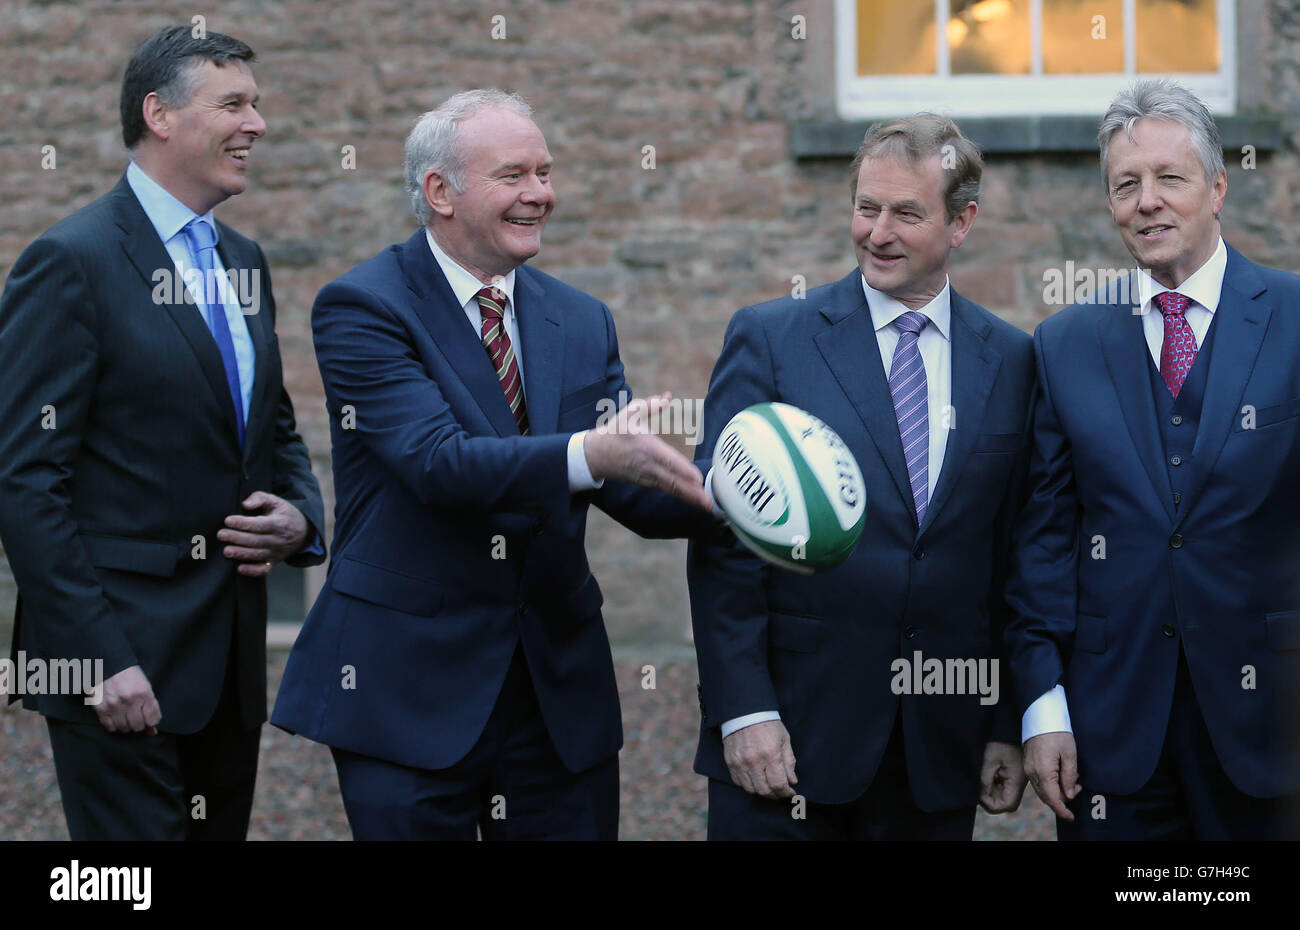 Philip Browne (CEO IRFU), Northern Ireland Deputy First Minister Martin McGuinness, Taoisech Enda Kenny and Northern Ireland First Minister Peter Robinson during the launch of an all-Ireland bid to host the 2023 Rugby World Cup at the The Royal School, Armagh. Stock Photo